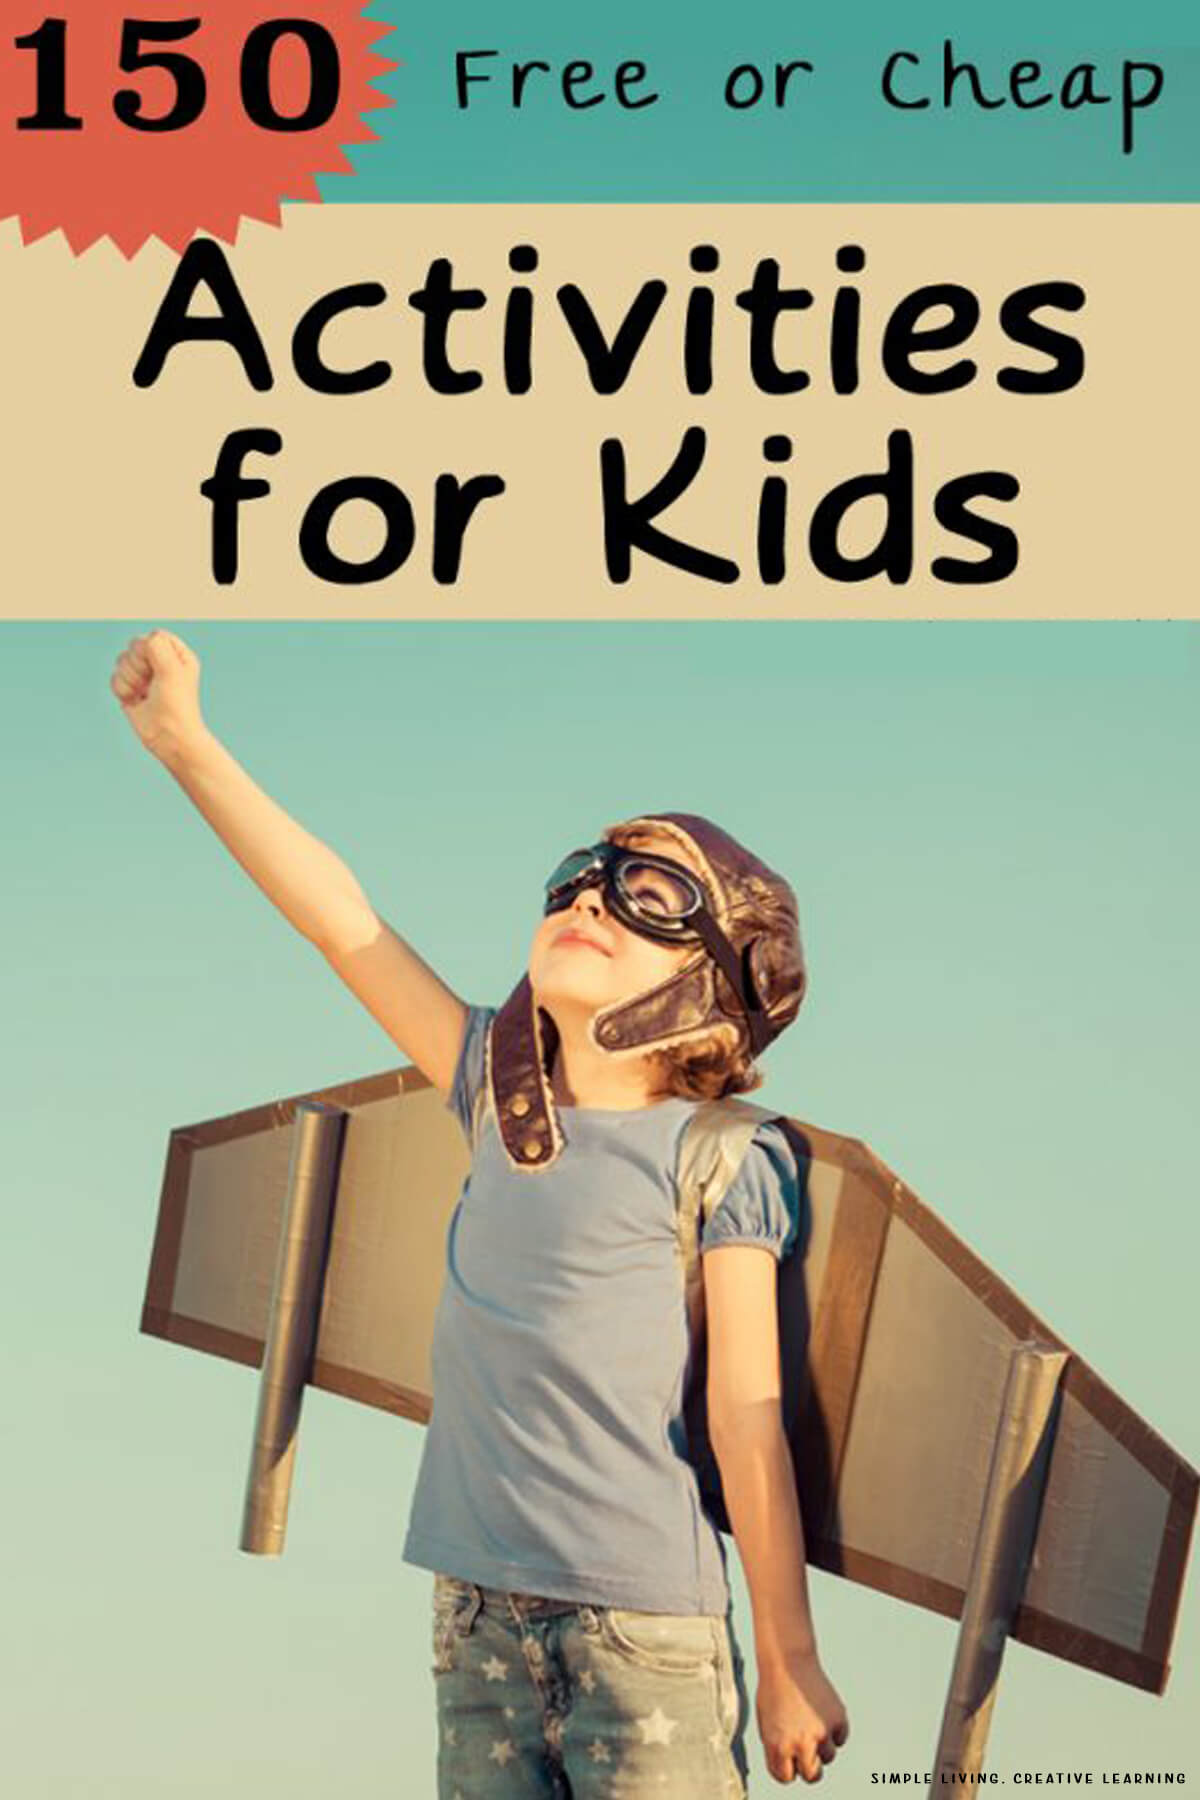 150 Free (or Cheap) Activities for Kids